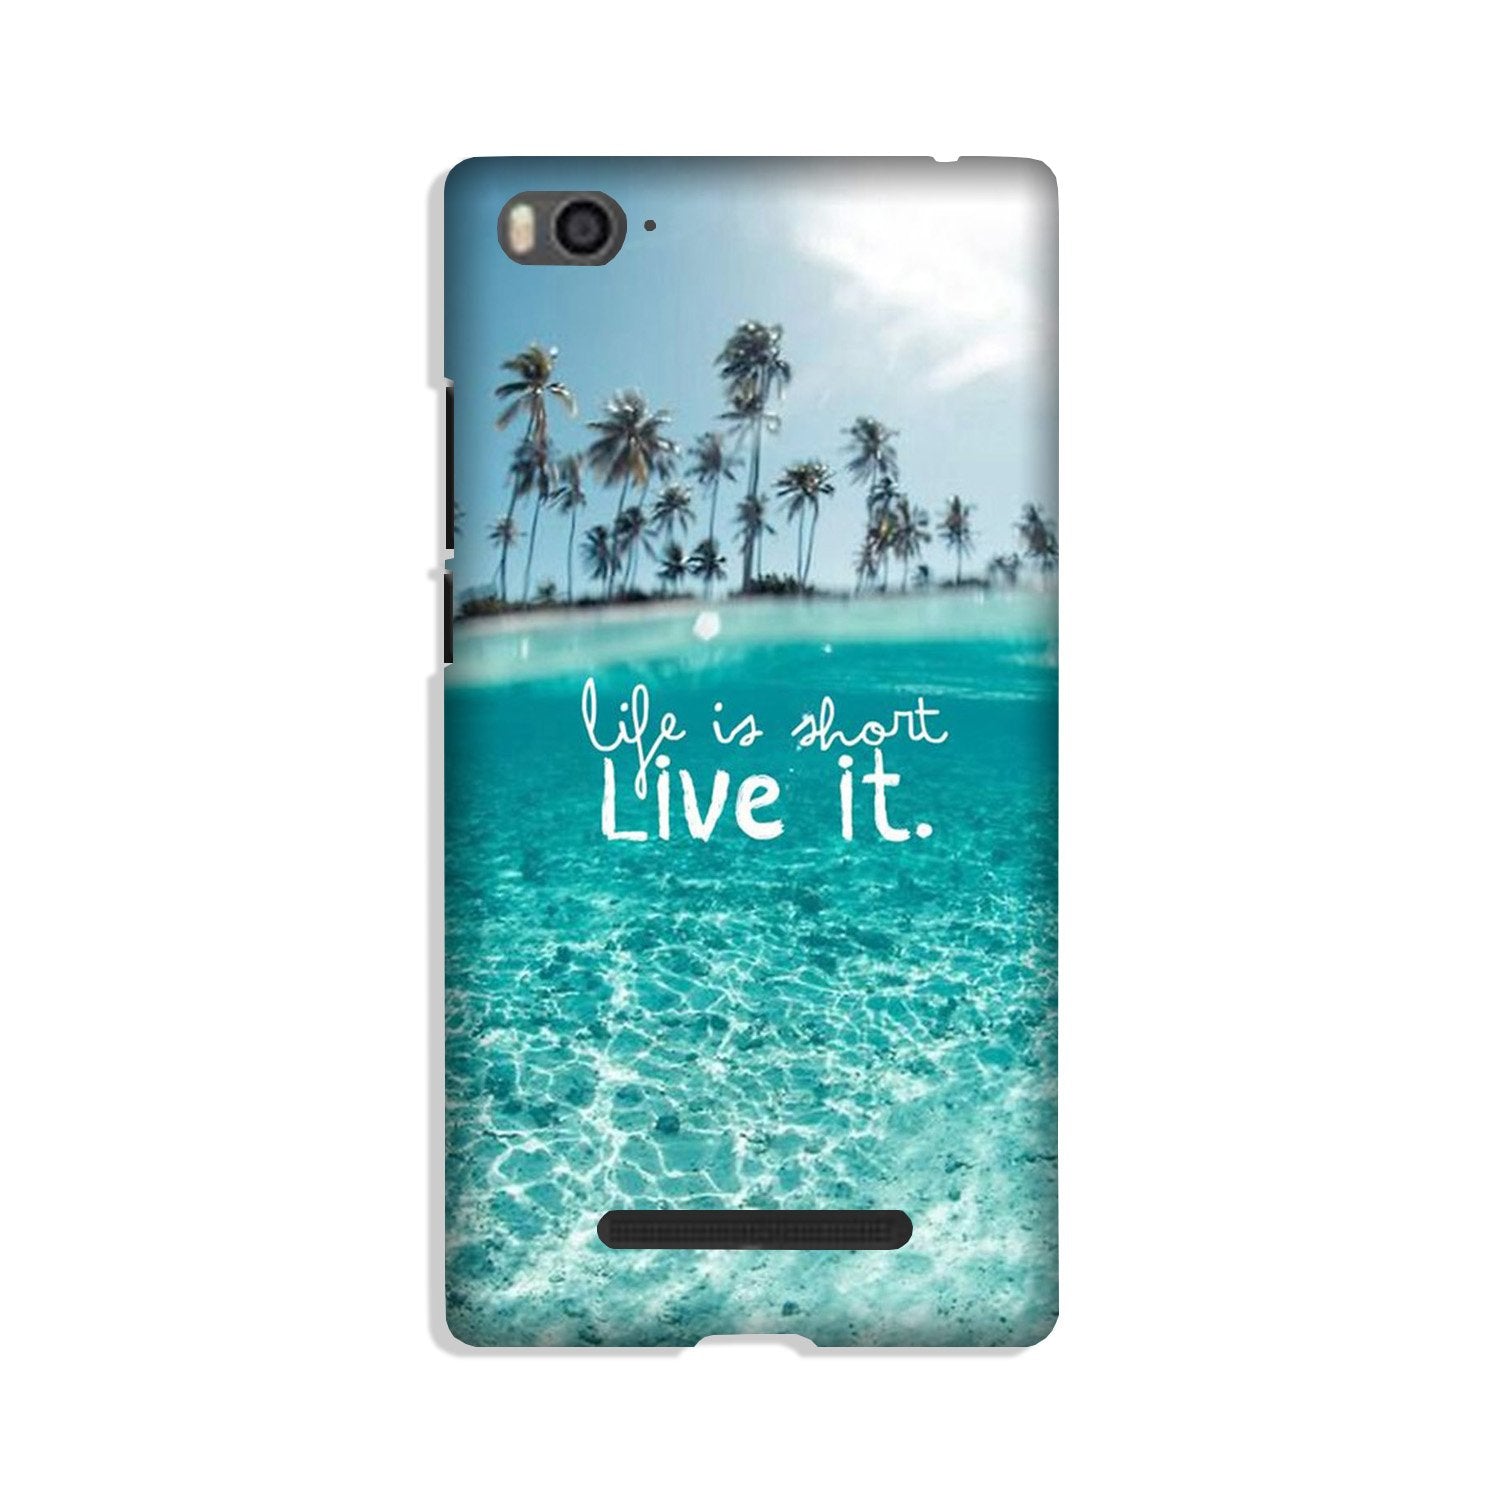 Life is short live it Case for Xiaomi Redmi 5A